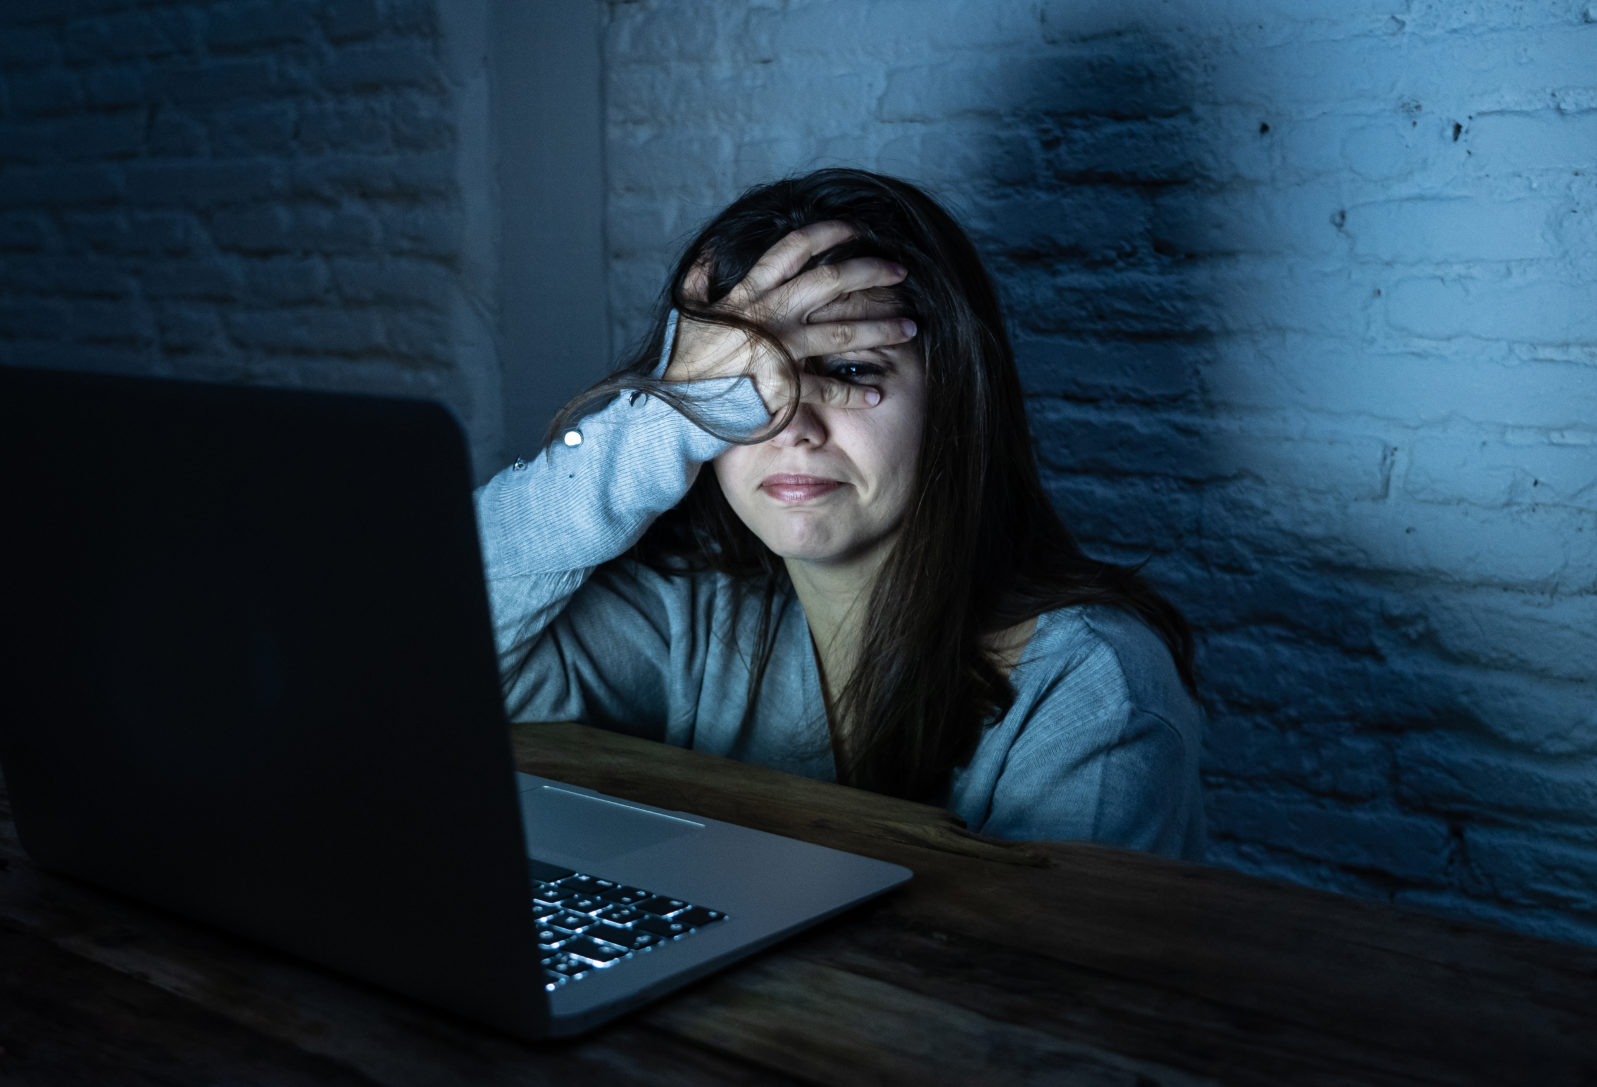 Scared woman on laptop in the dark feeling fear suffering online harassment and cyberbullying